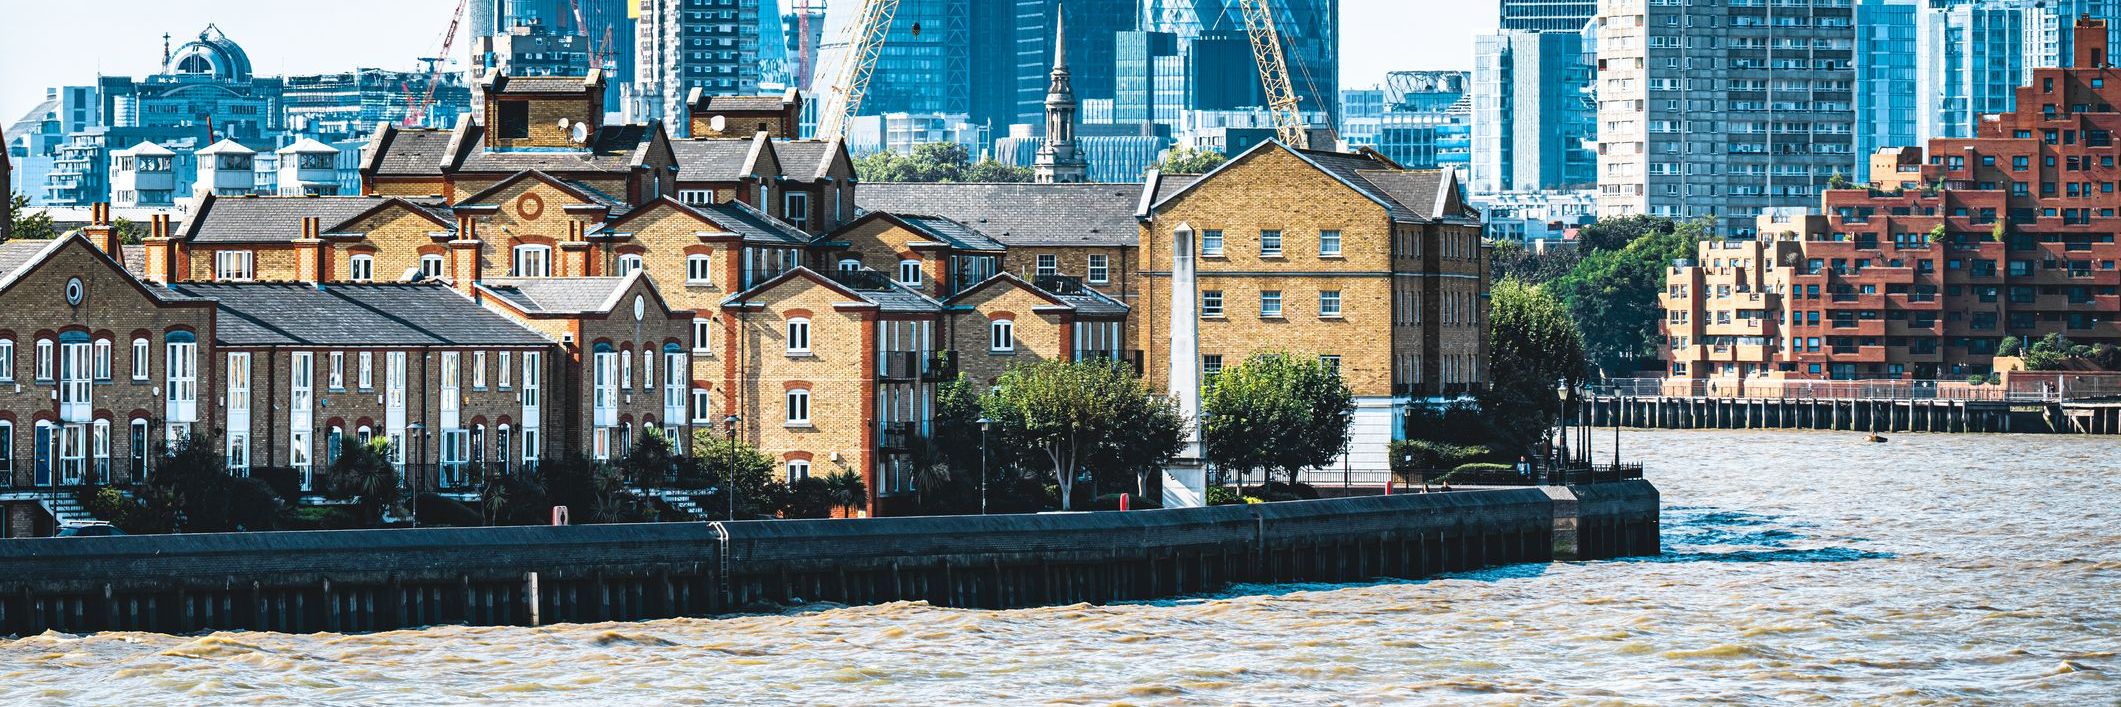 Riverside Properties & Conveyancing - The Key Issues Considered